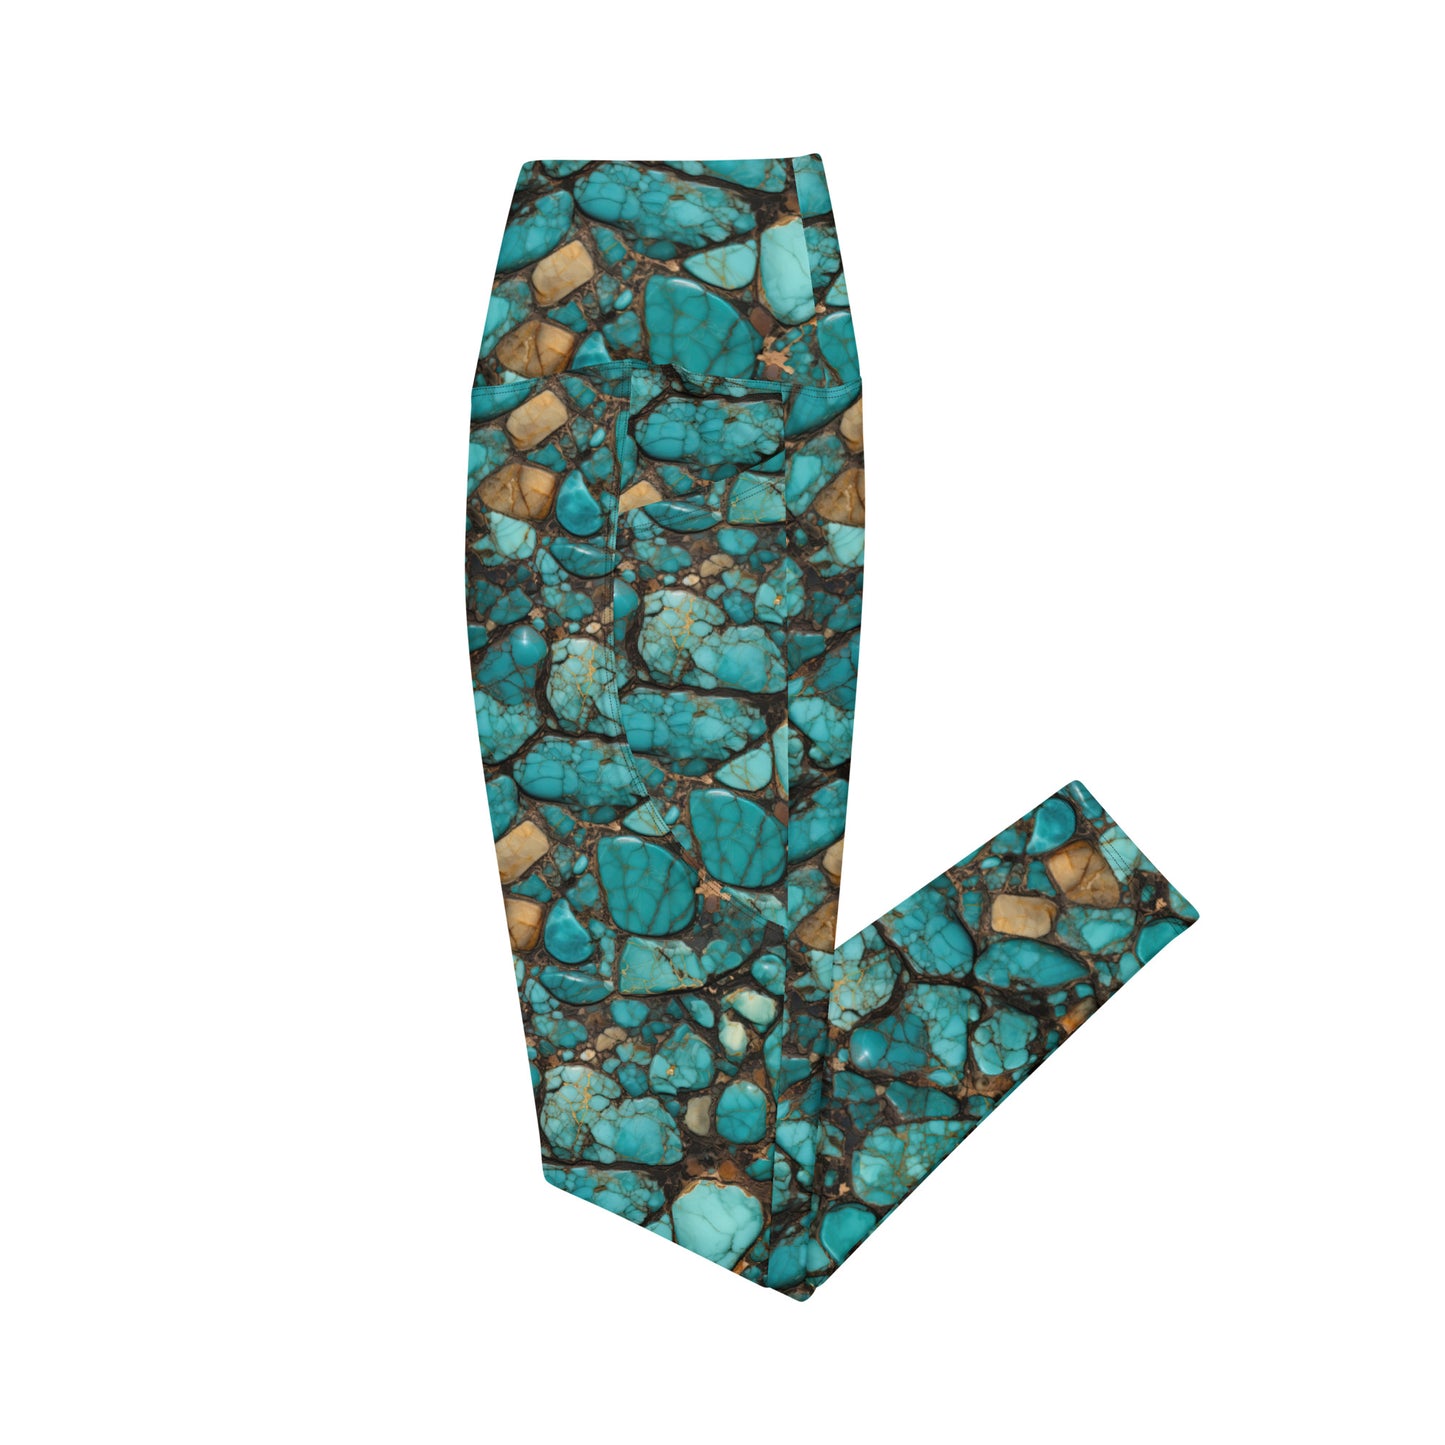 All Turquoise Leggings With Pockets